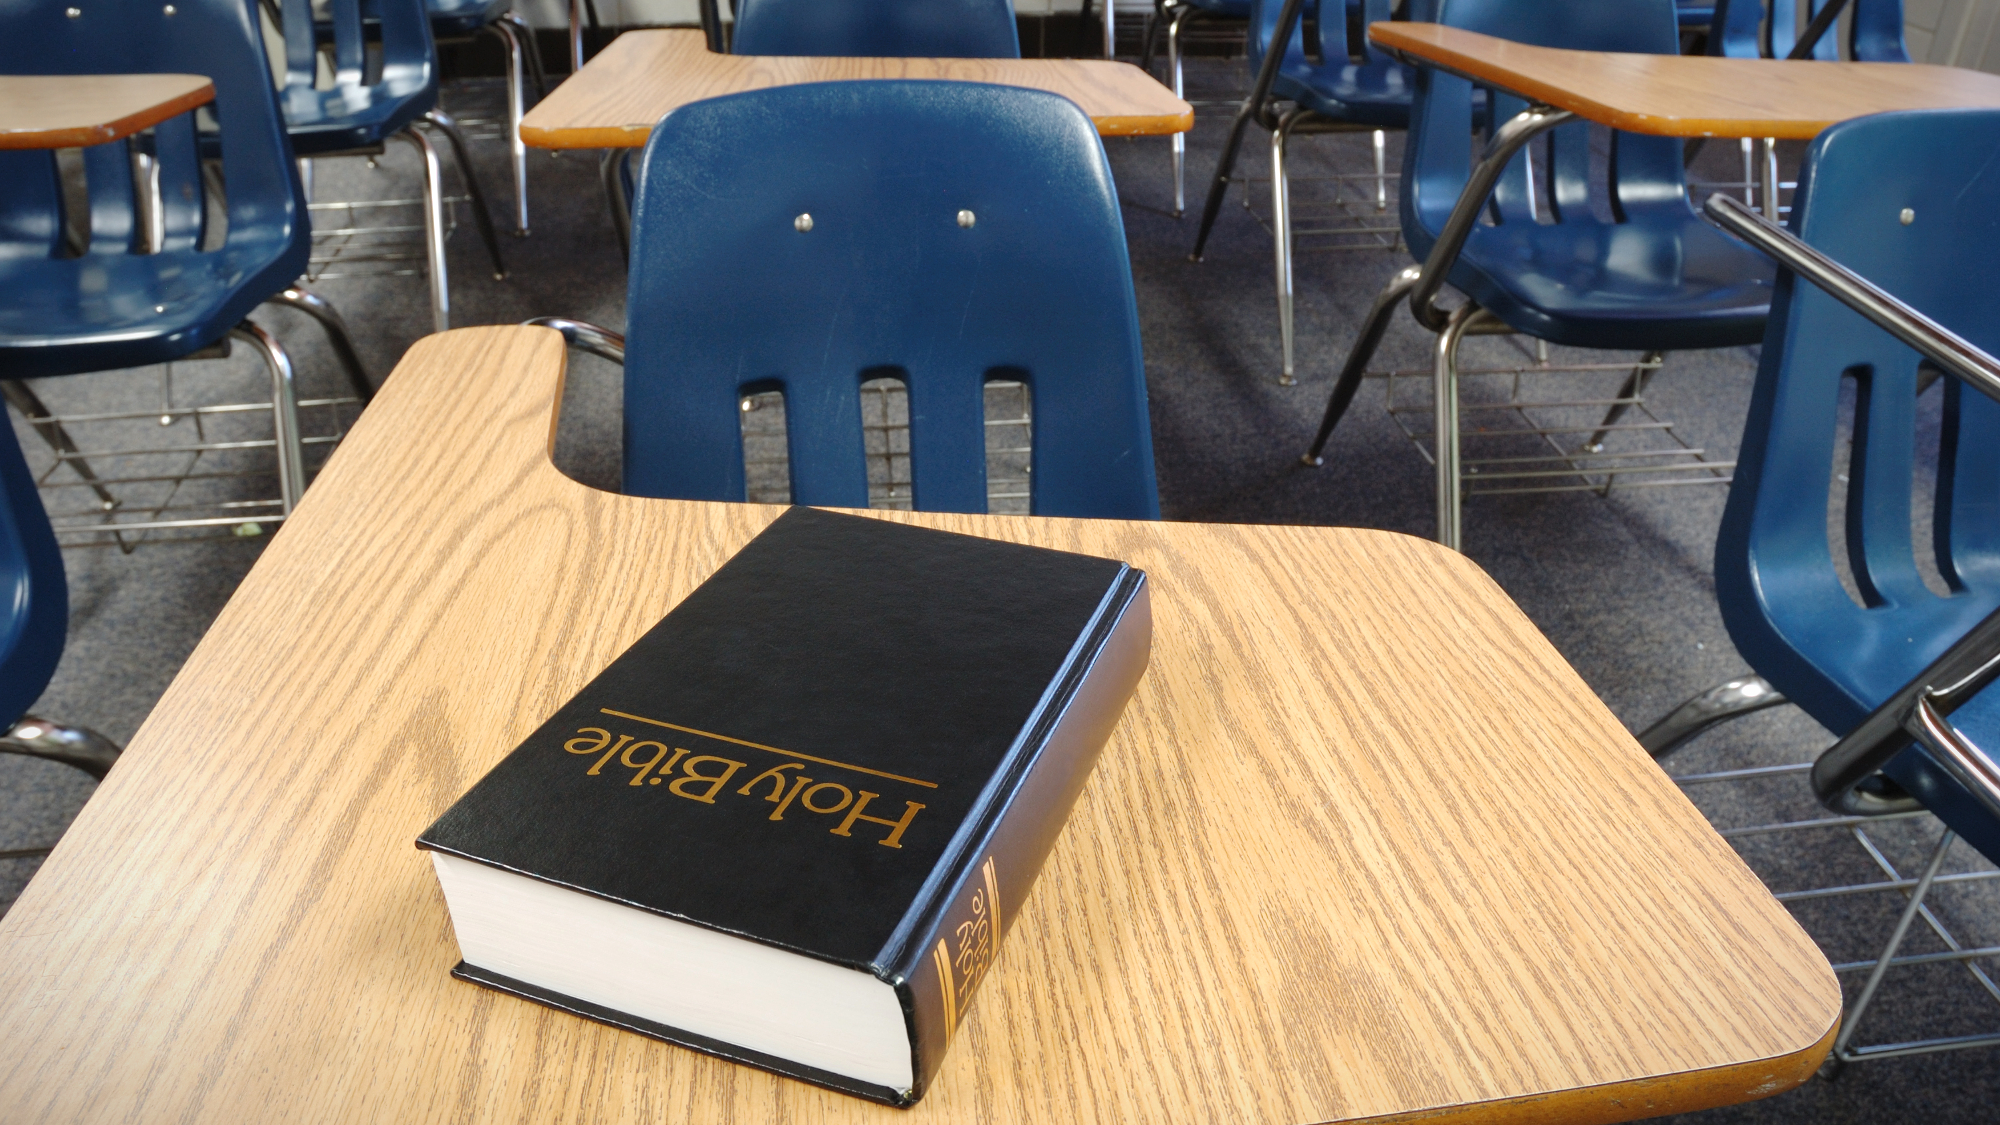  Oklahoma schools chief orders Bible taught in class 